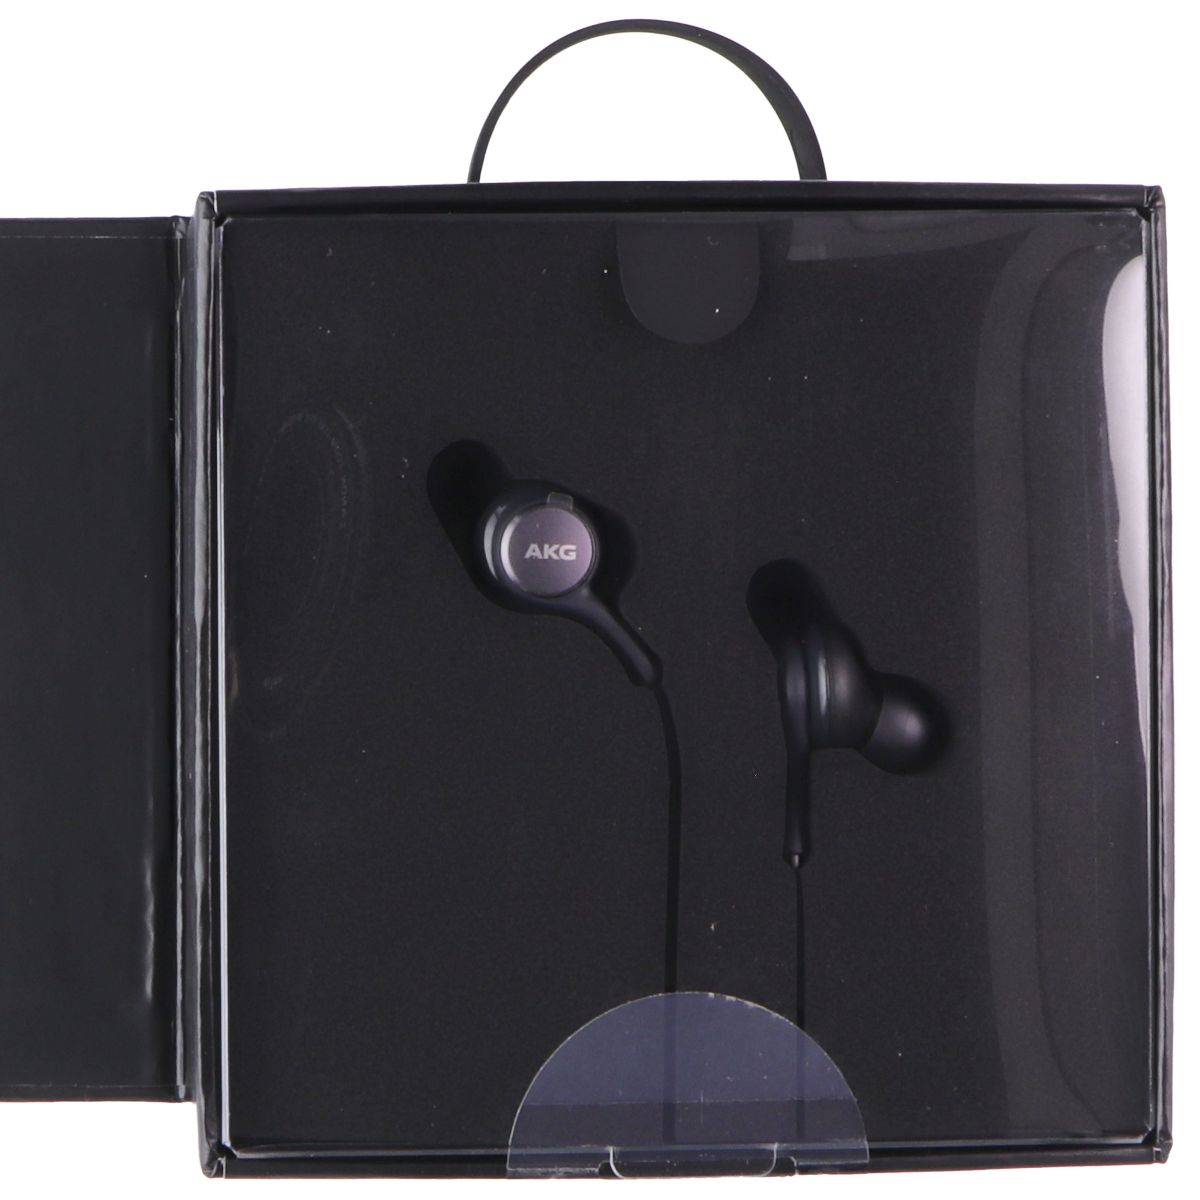 Samsung Wired (3.5mm) Earbud Headphones Powered by AKG w/Carrying Case - Black Portable Audio - Headphones Samsung    - Simple Cell Bulk Wholesale Pricing - USA Seller